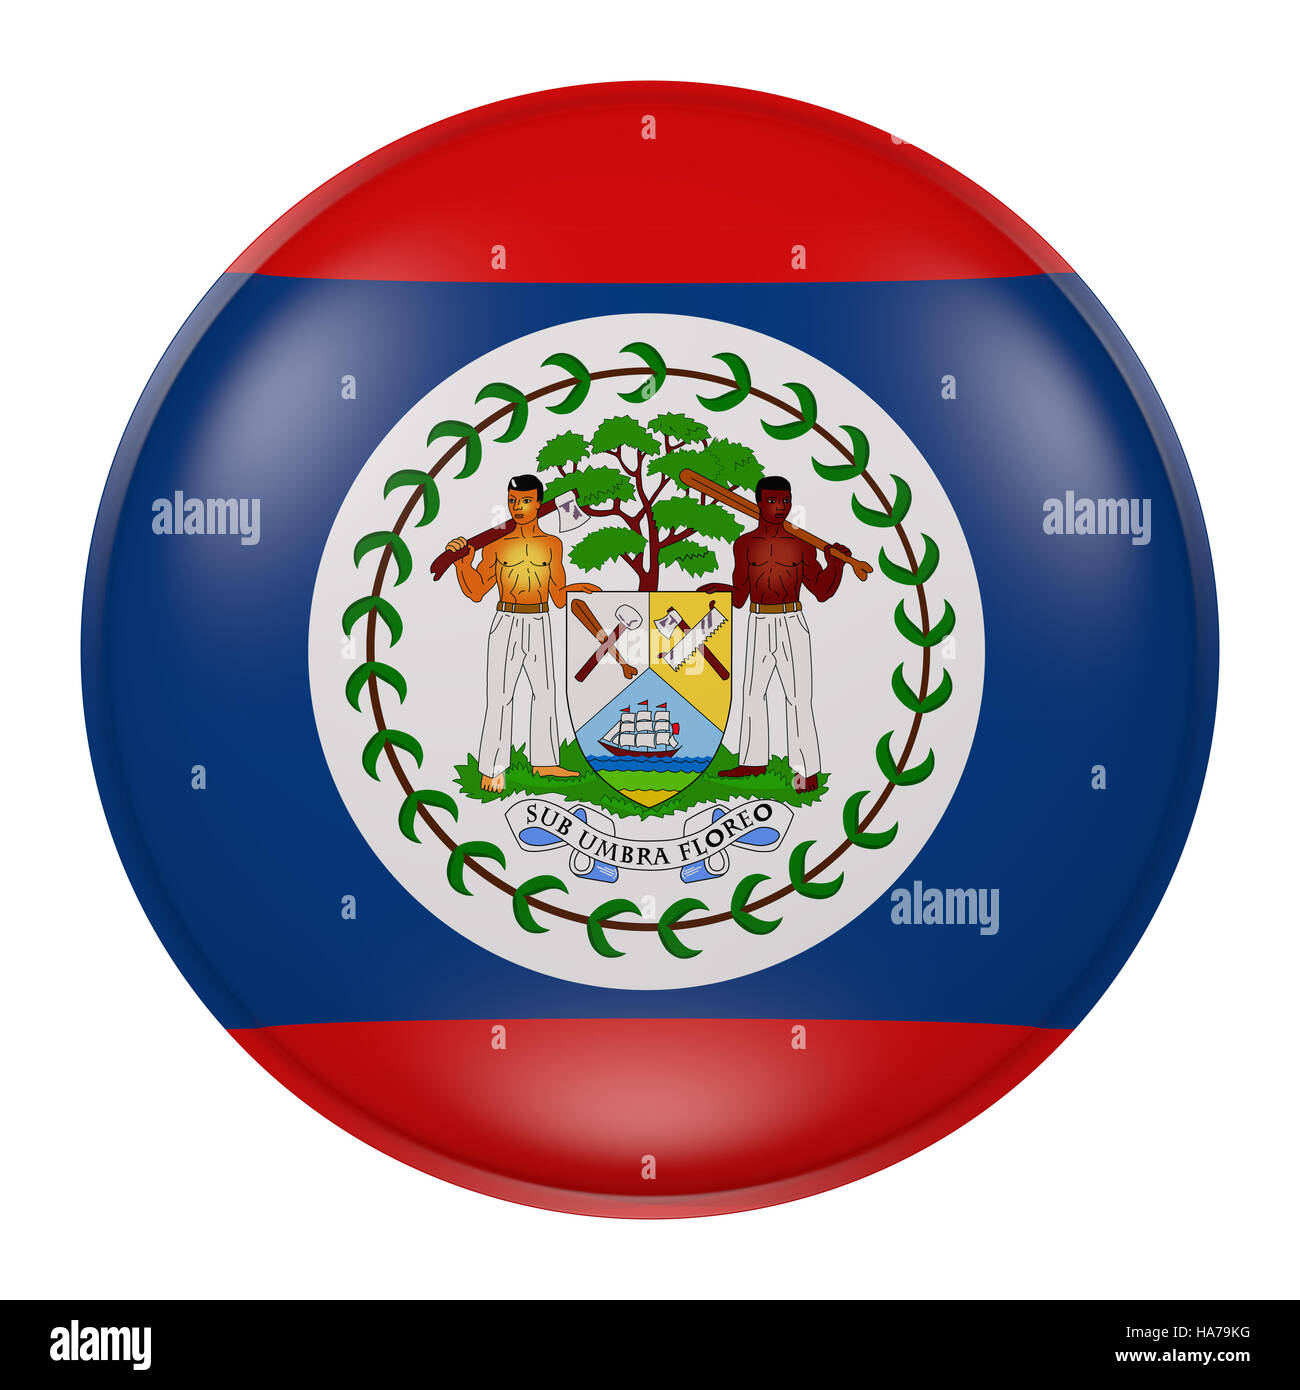 3d rendering of Belize flag on a button Stock Photo